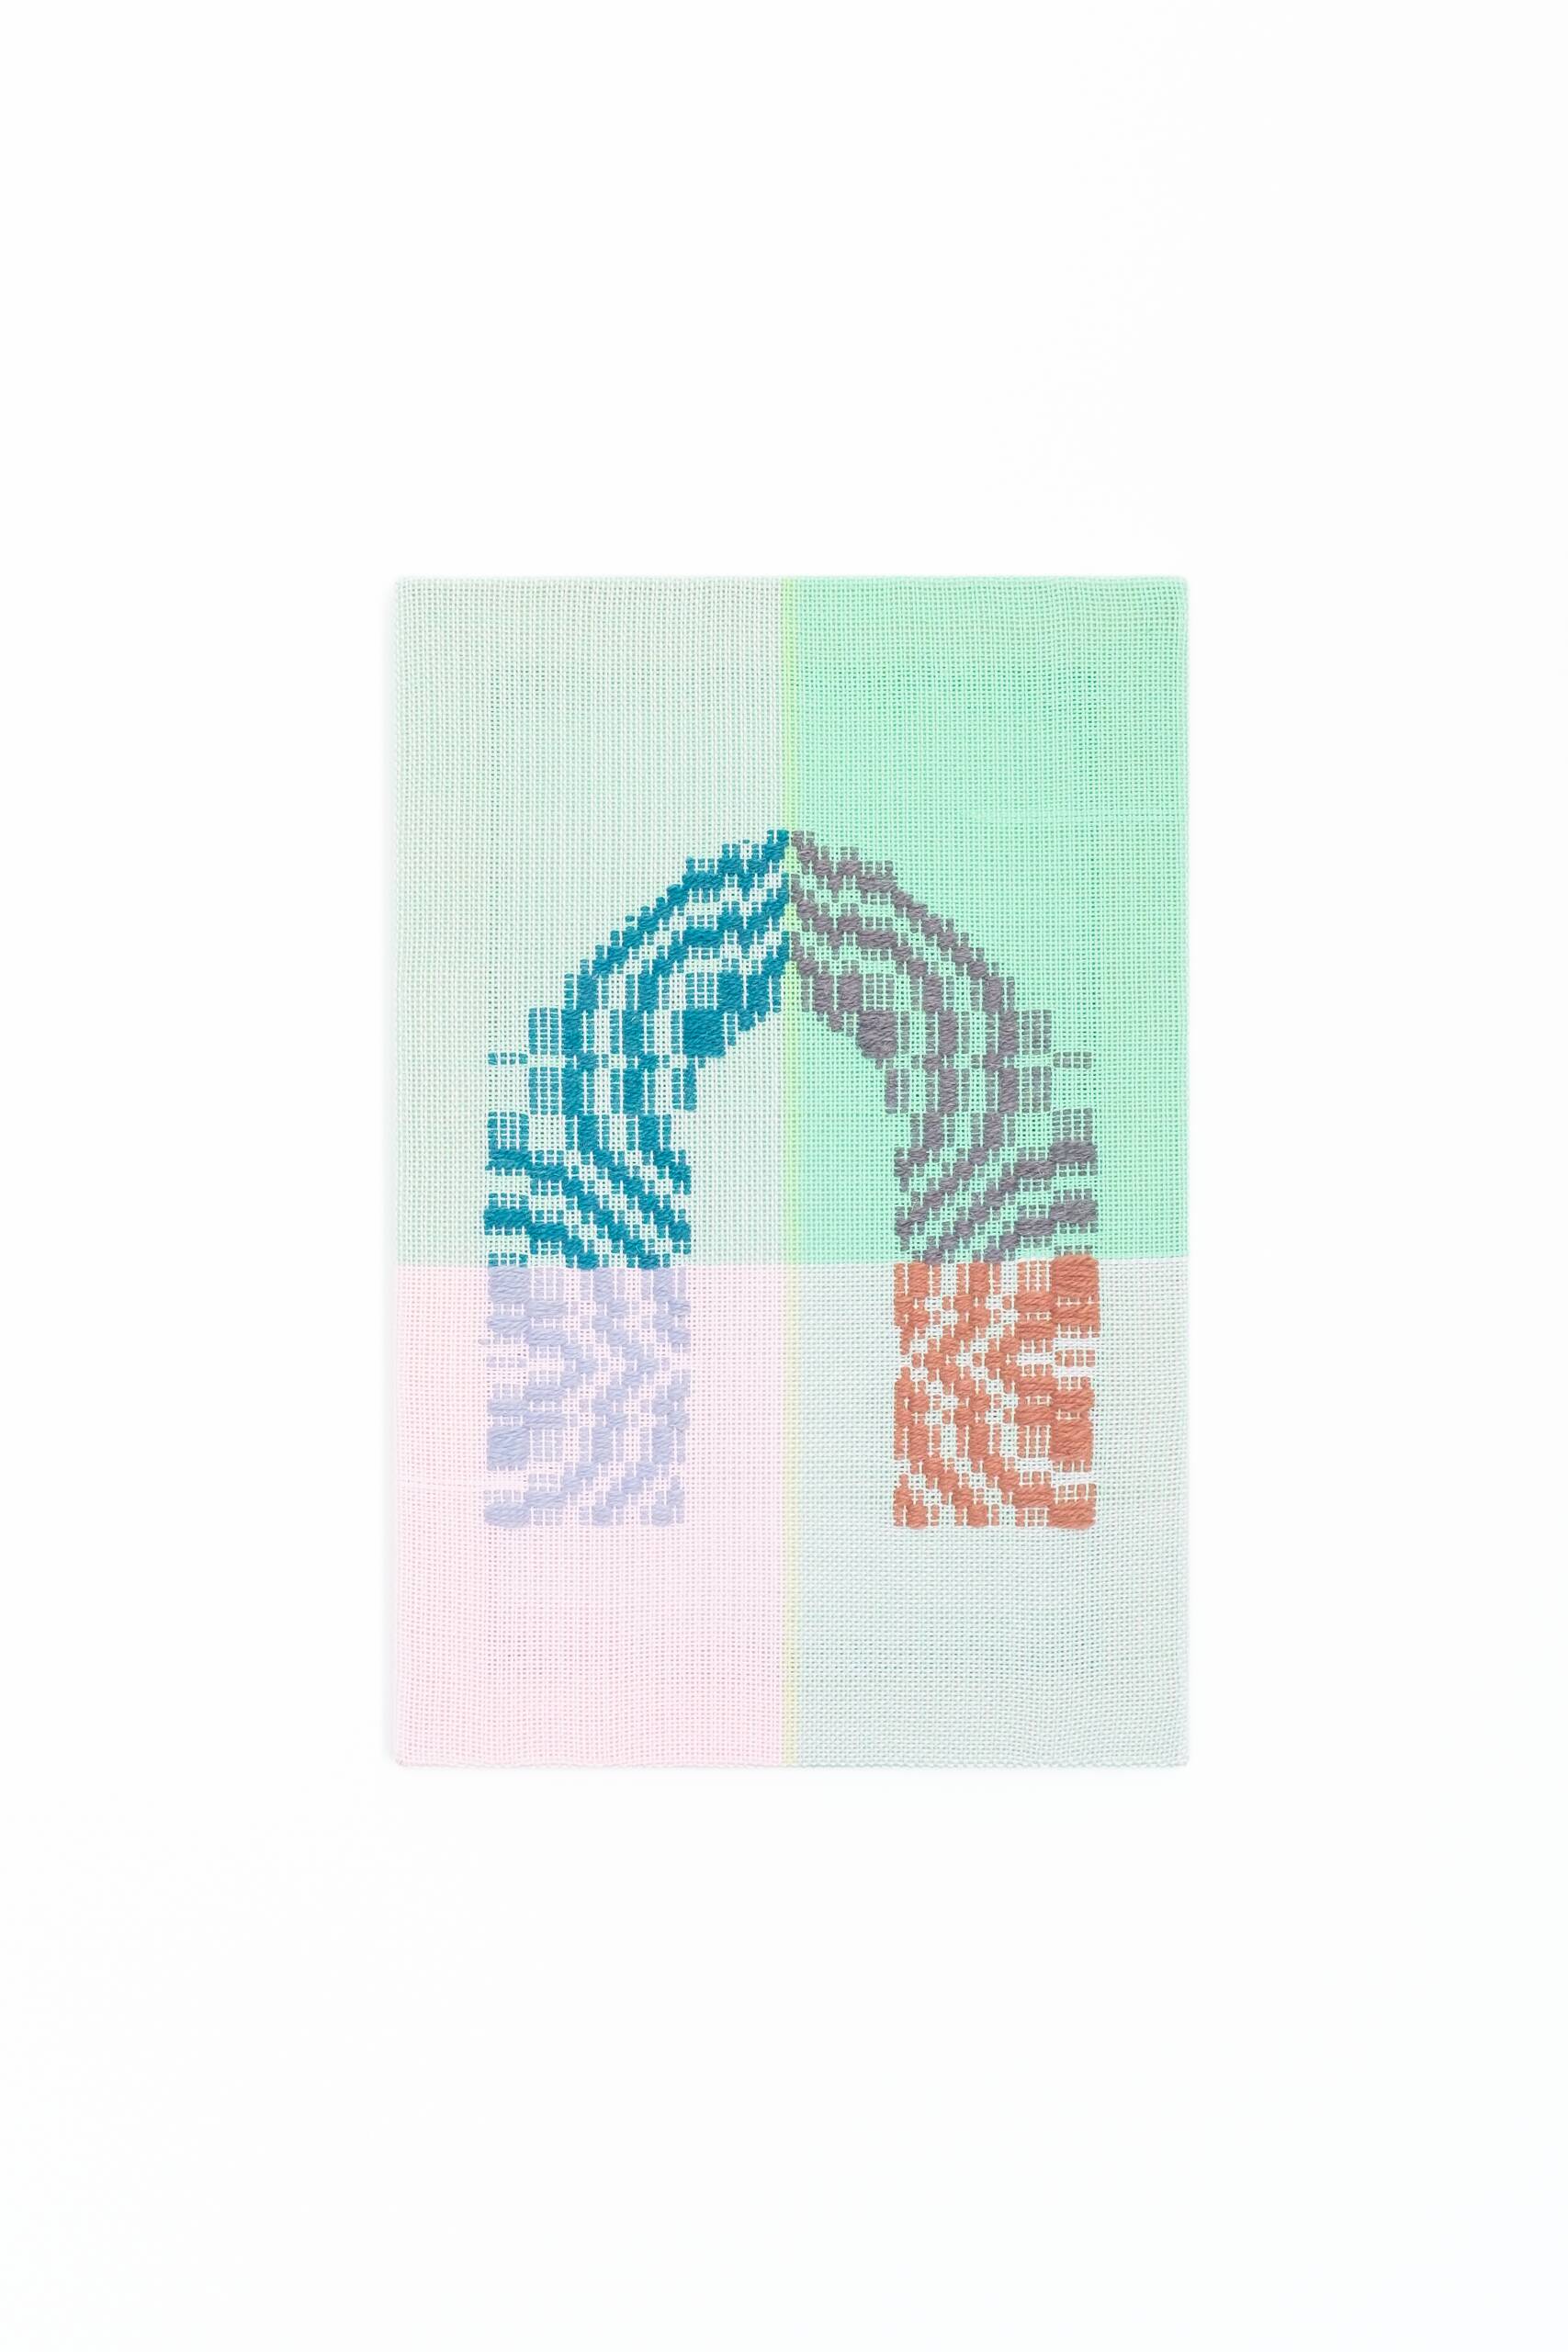 Thought-form [arch], Handwoven cotton and wool yarn, 2022